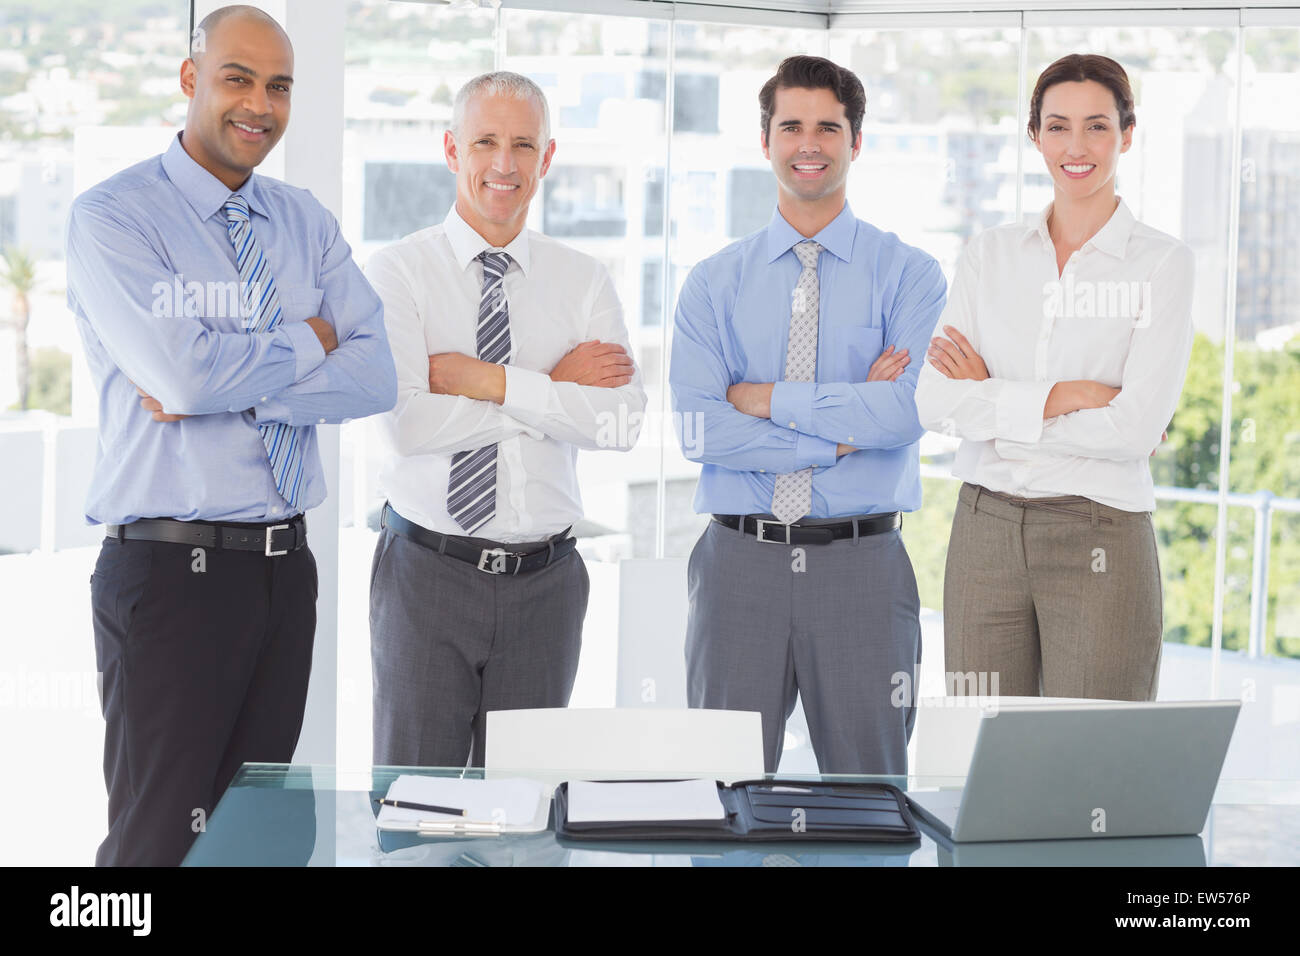 Business team smiling at camera arms crossed Stock Photo